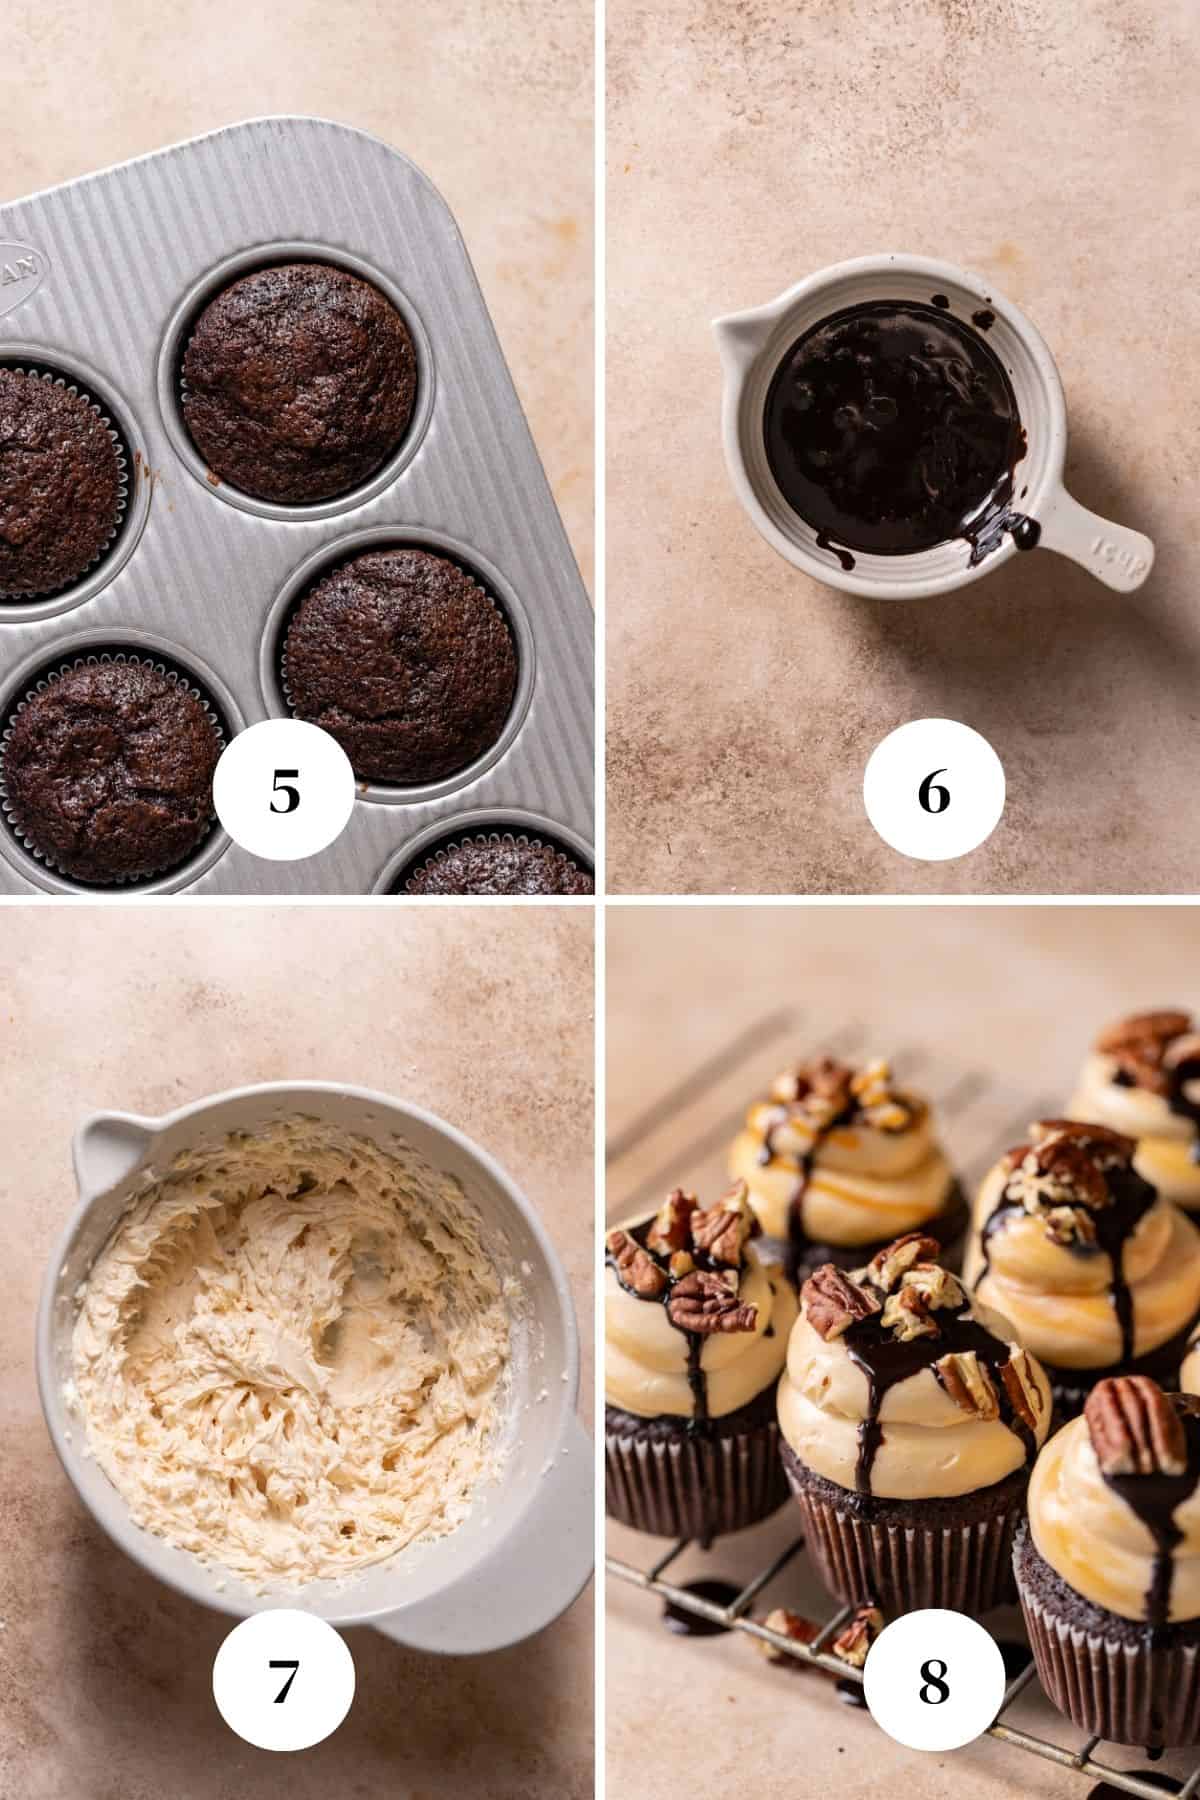 A process collage of the steps for making caramel buttercream and decorating the chocolate cupcakes.